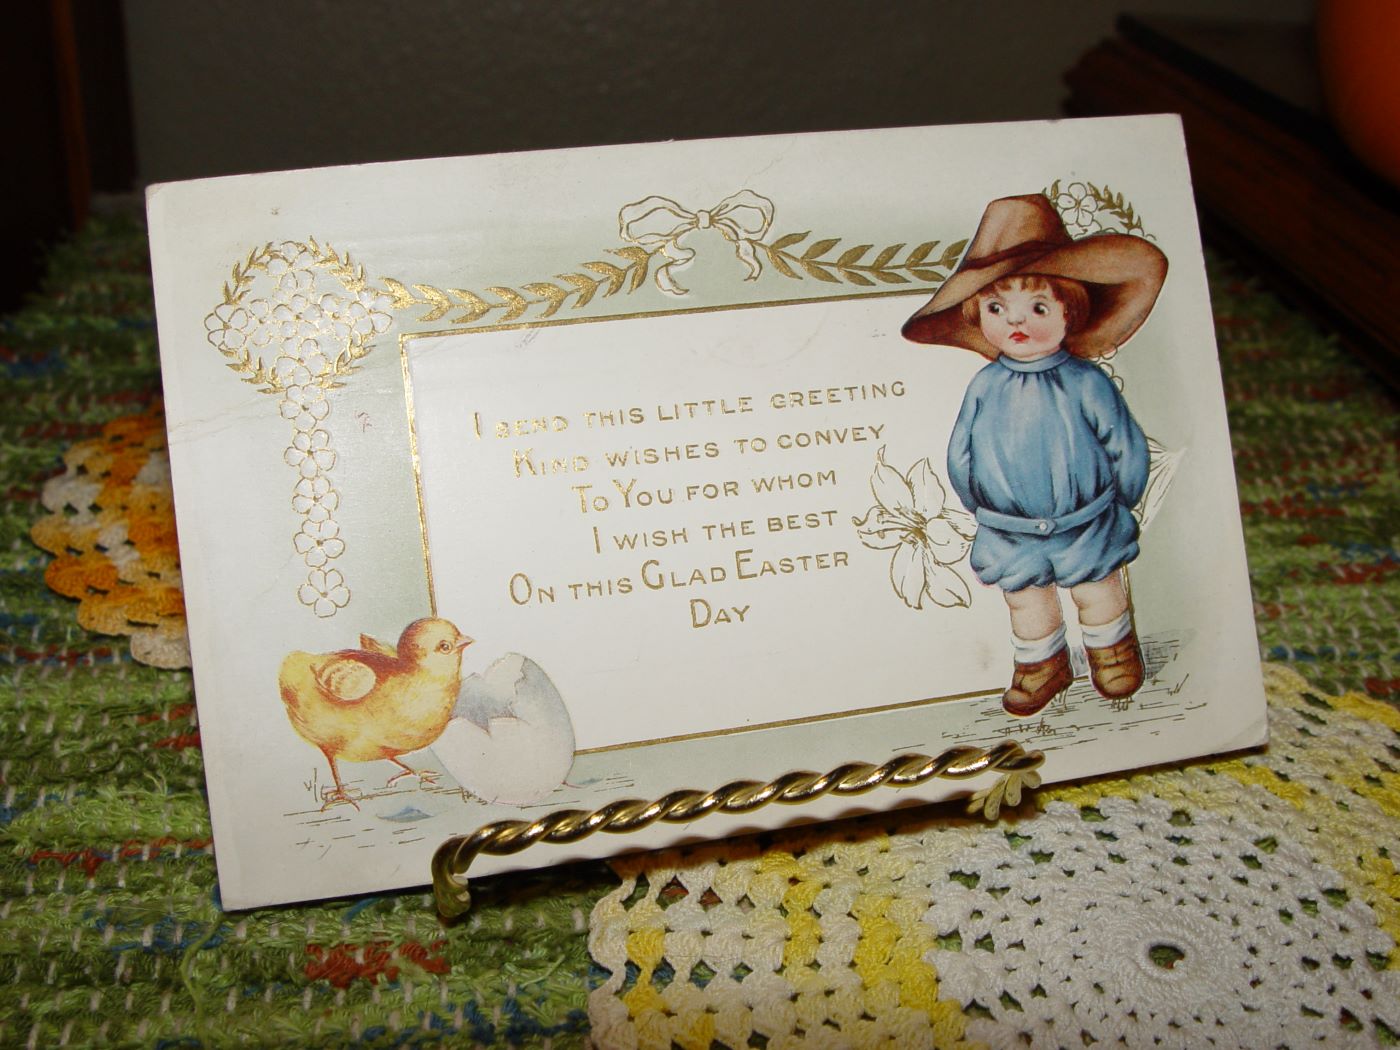 1900's Easter
                                                Signed Postcard, Floppy
                                                Hatted child watching
                                                Chick Newly Born